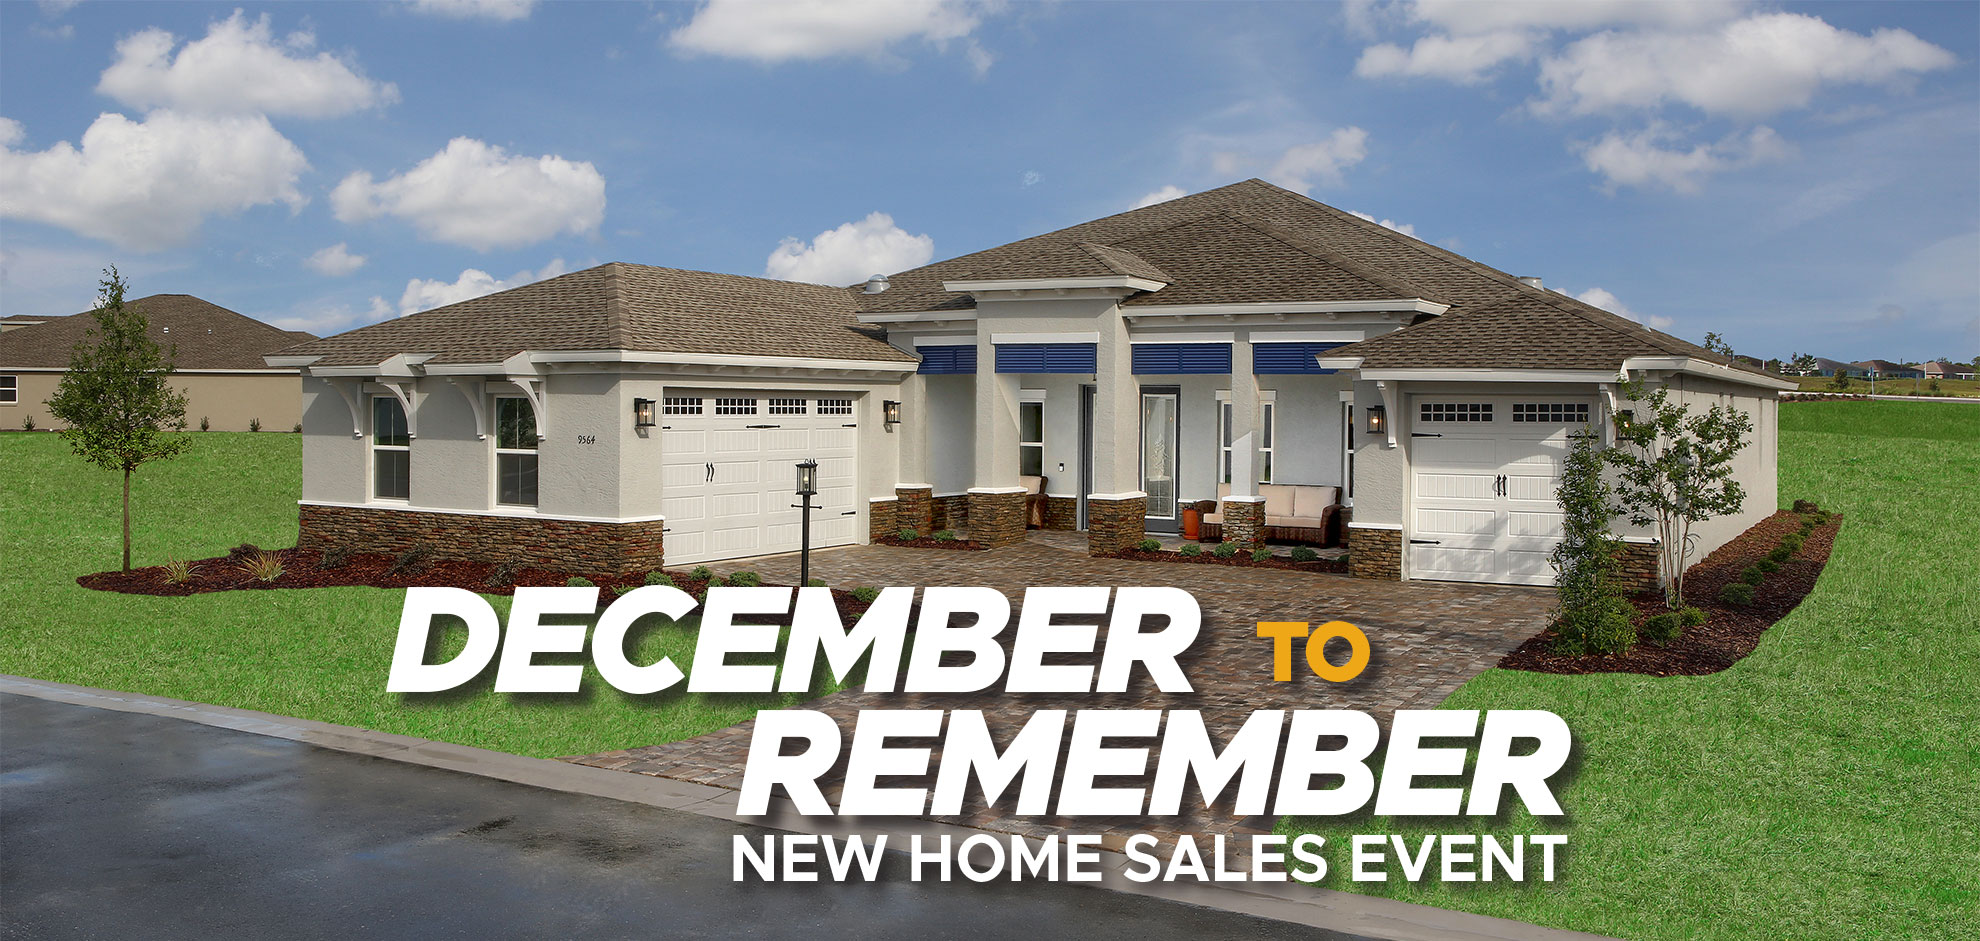 December to Remember New Home Sales Event at On Top of the World